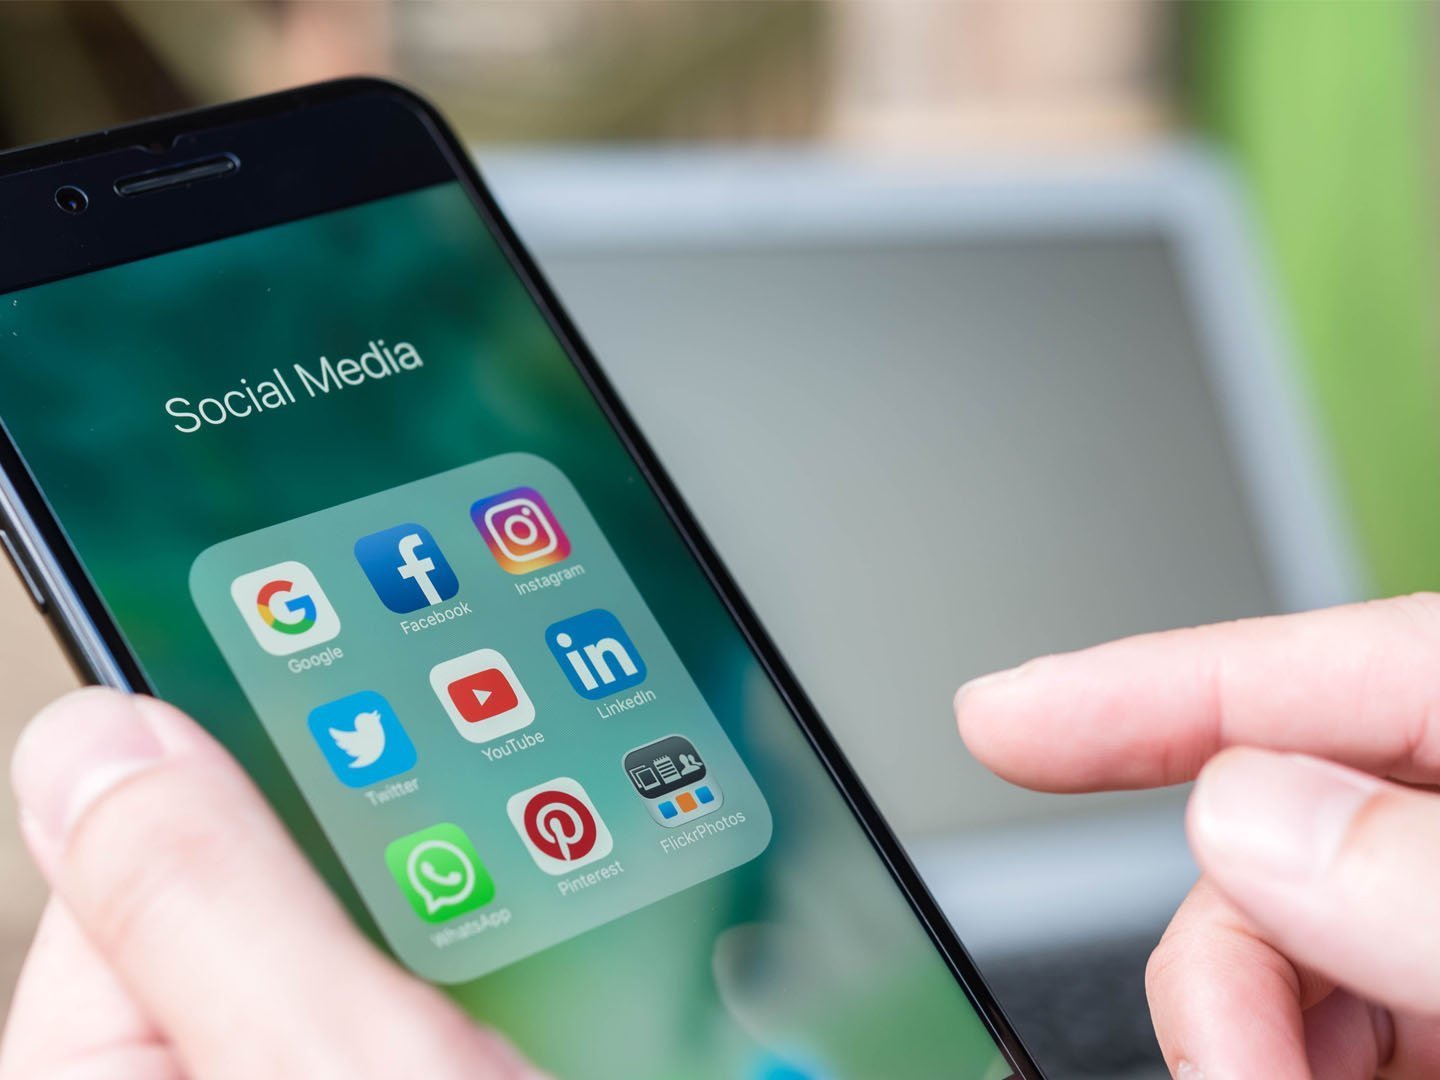 An image of a smart phone showing the user is in the Social Media menu containing nine apps which are Google, Facebook, Instagram, Twitter, Youtube, LinkedIn, WhatsApp, Pinterest, and FlickrPhotos. This is an image relating to the blog article: Five social media tips for B2B Marketers